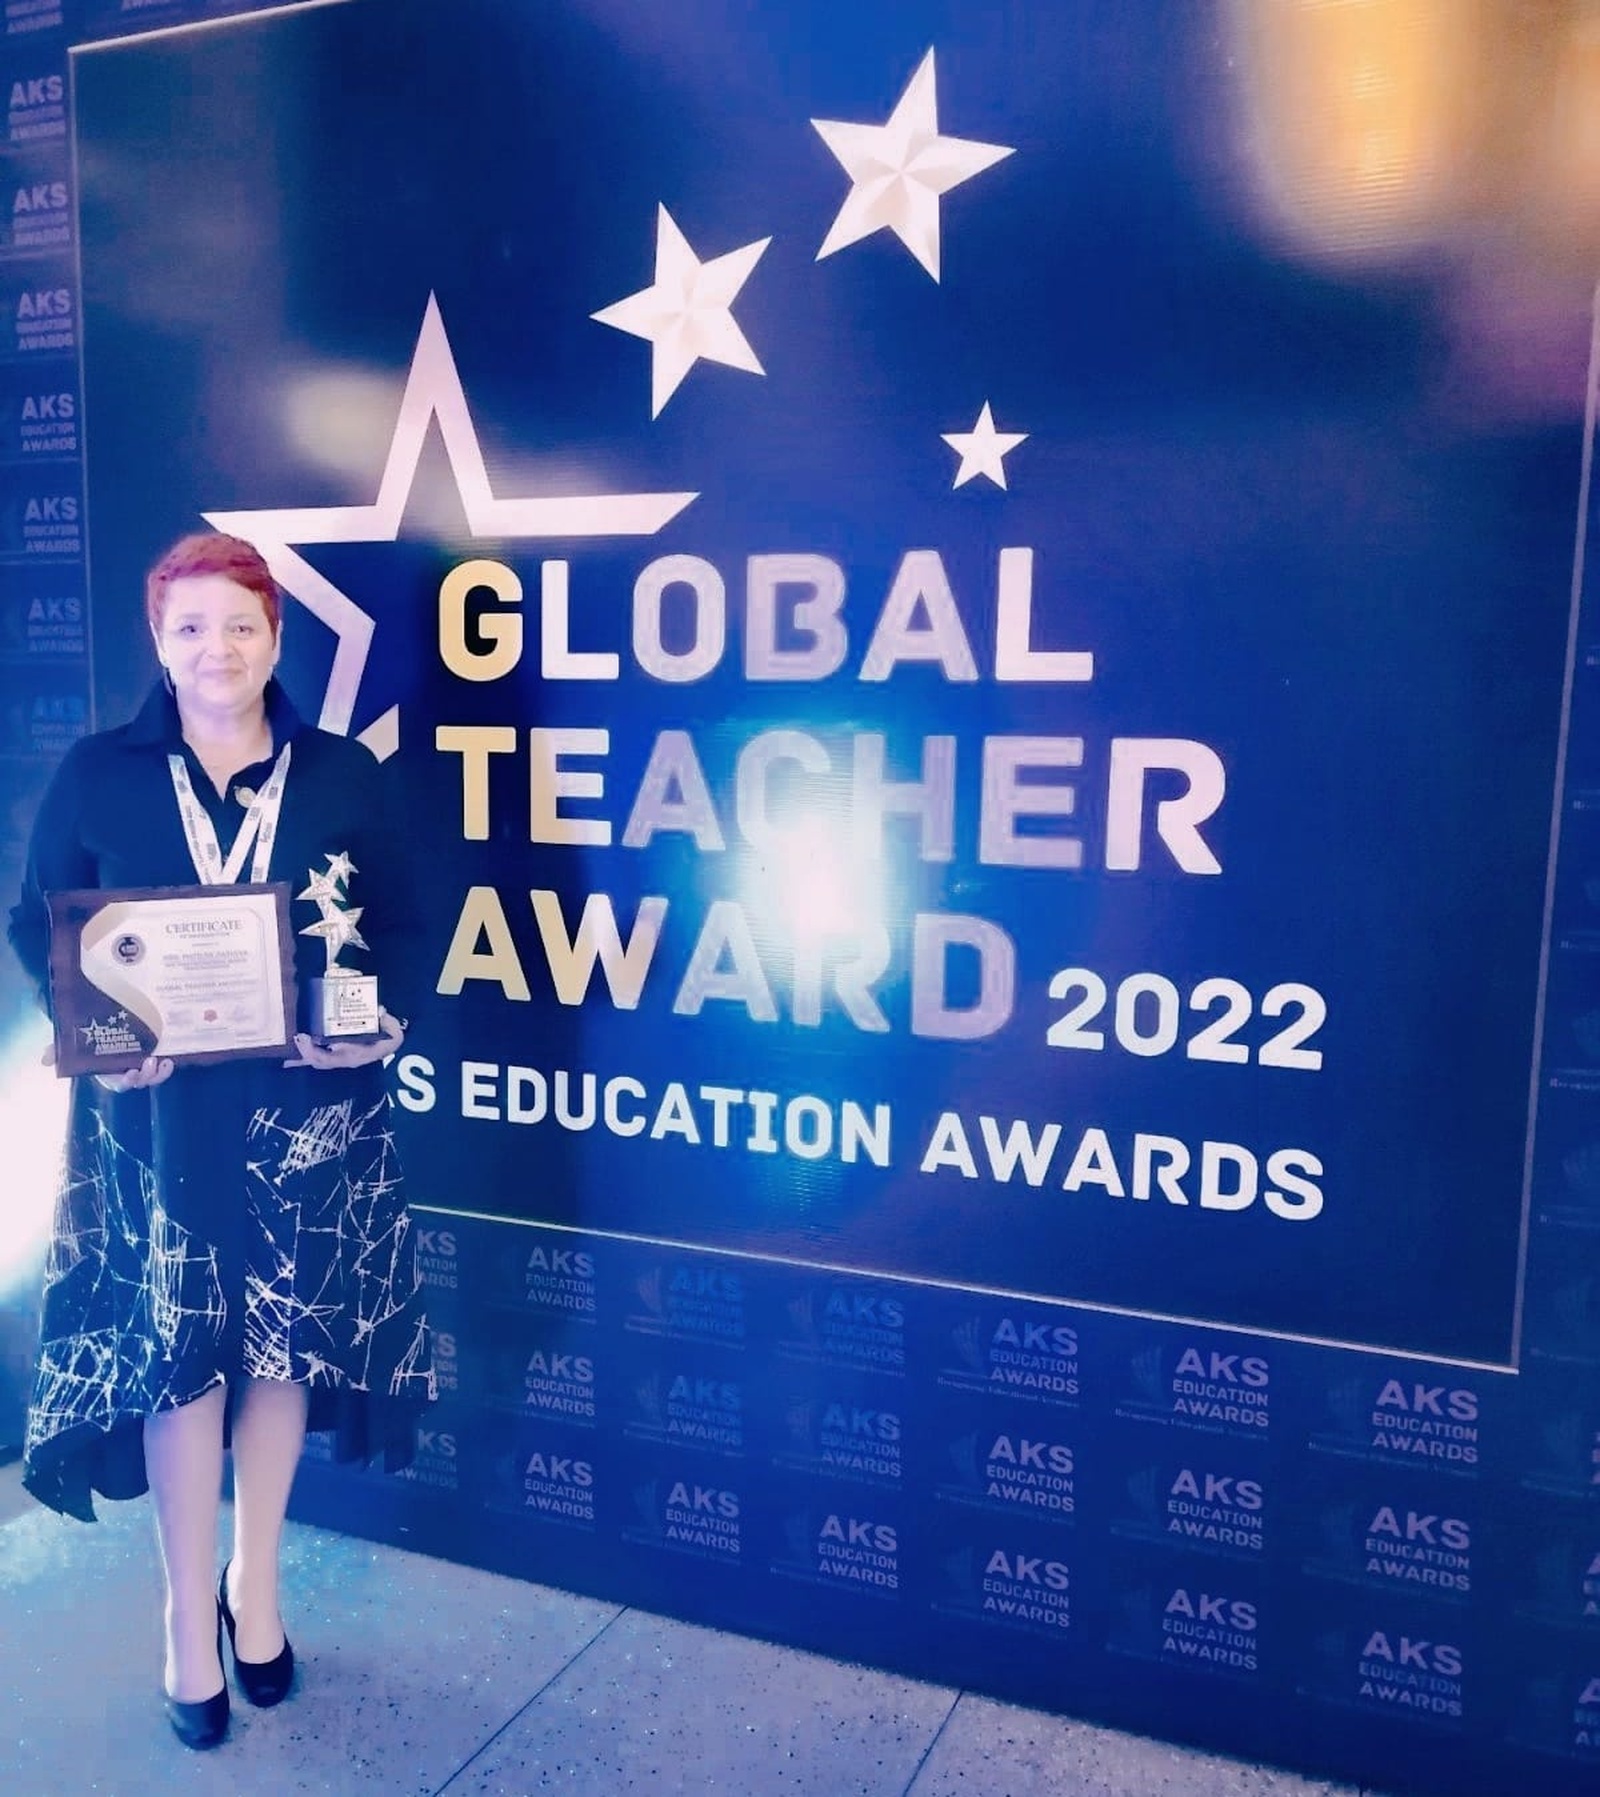 A student at the UNG’s School of Engineering and Management received Global Teacher Award 2022